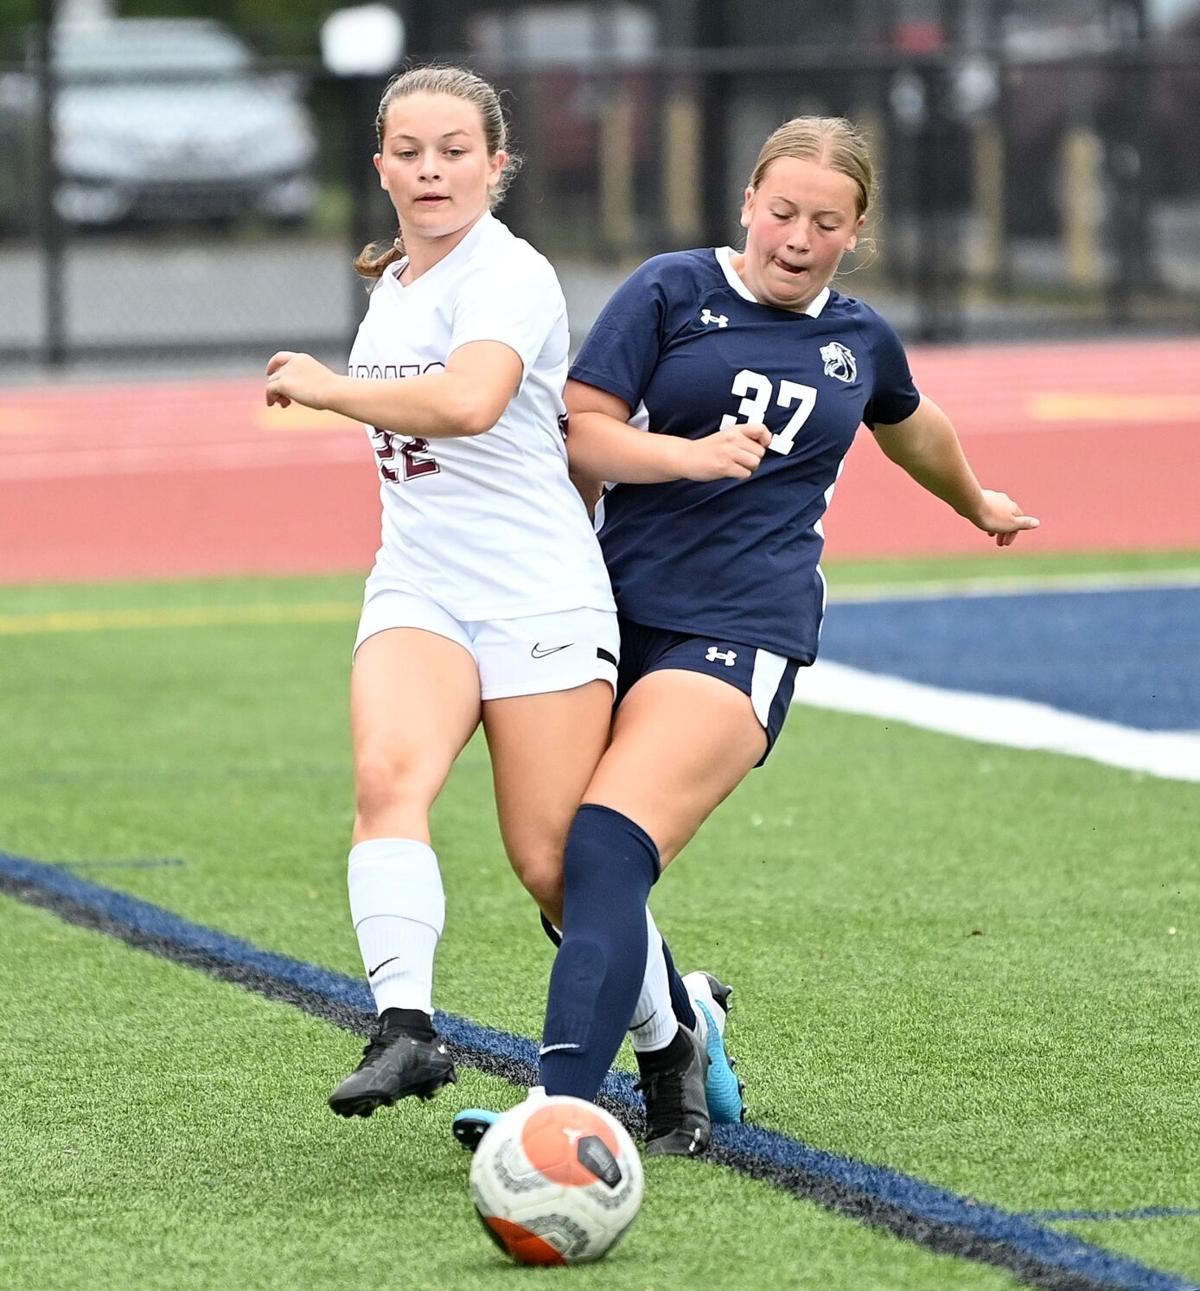 2023 Girls Soccer Team Previews: Key returners, newcomers and